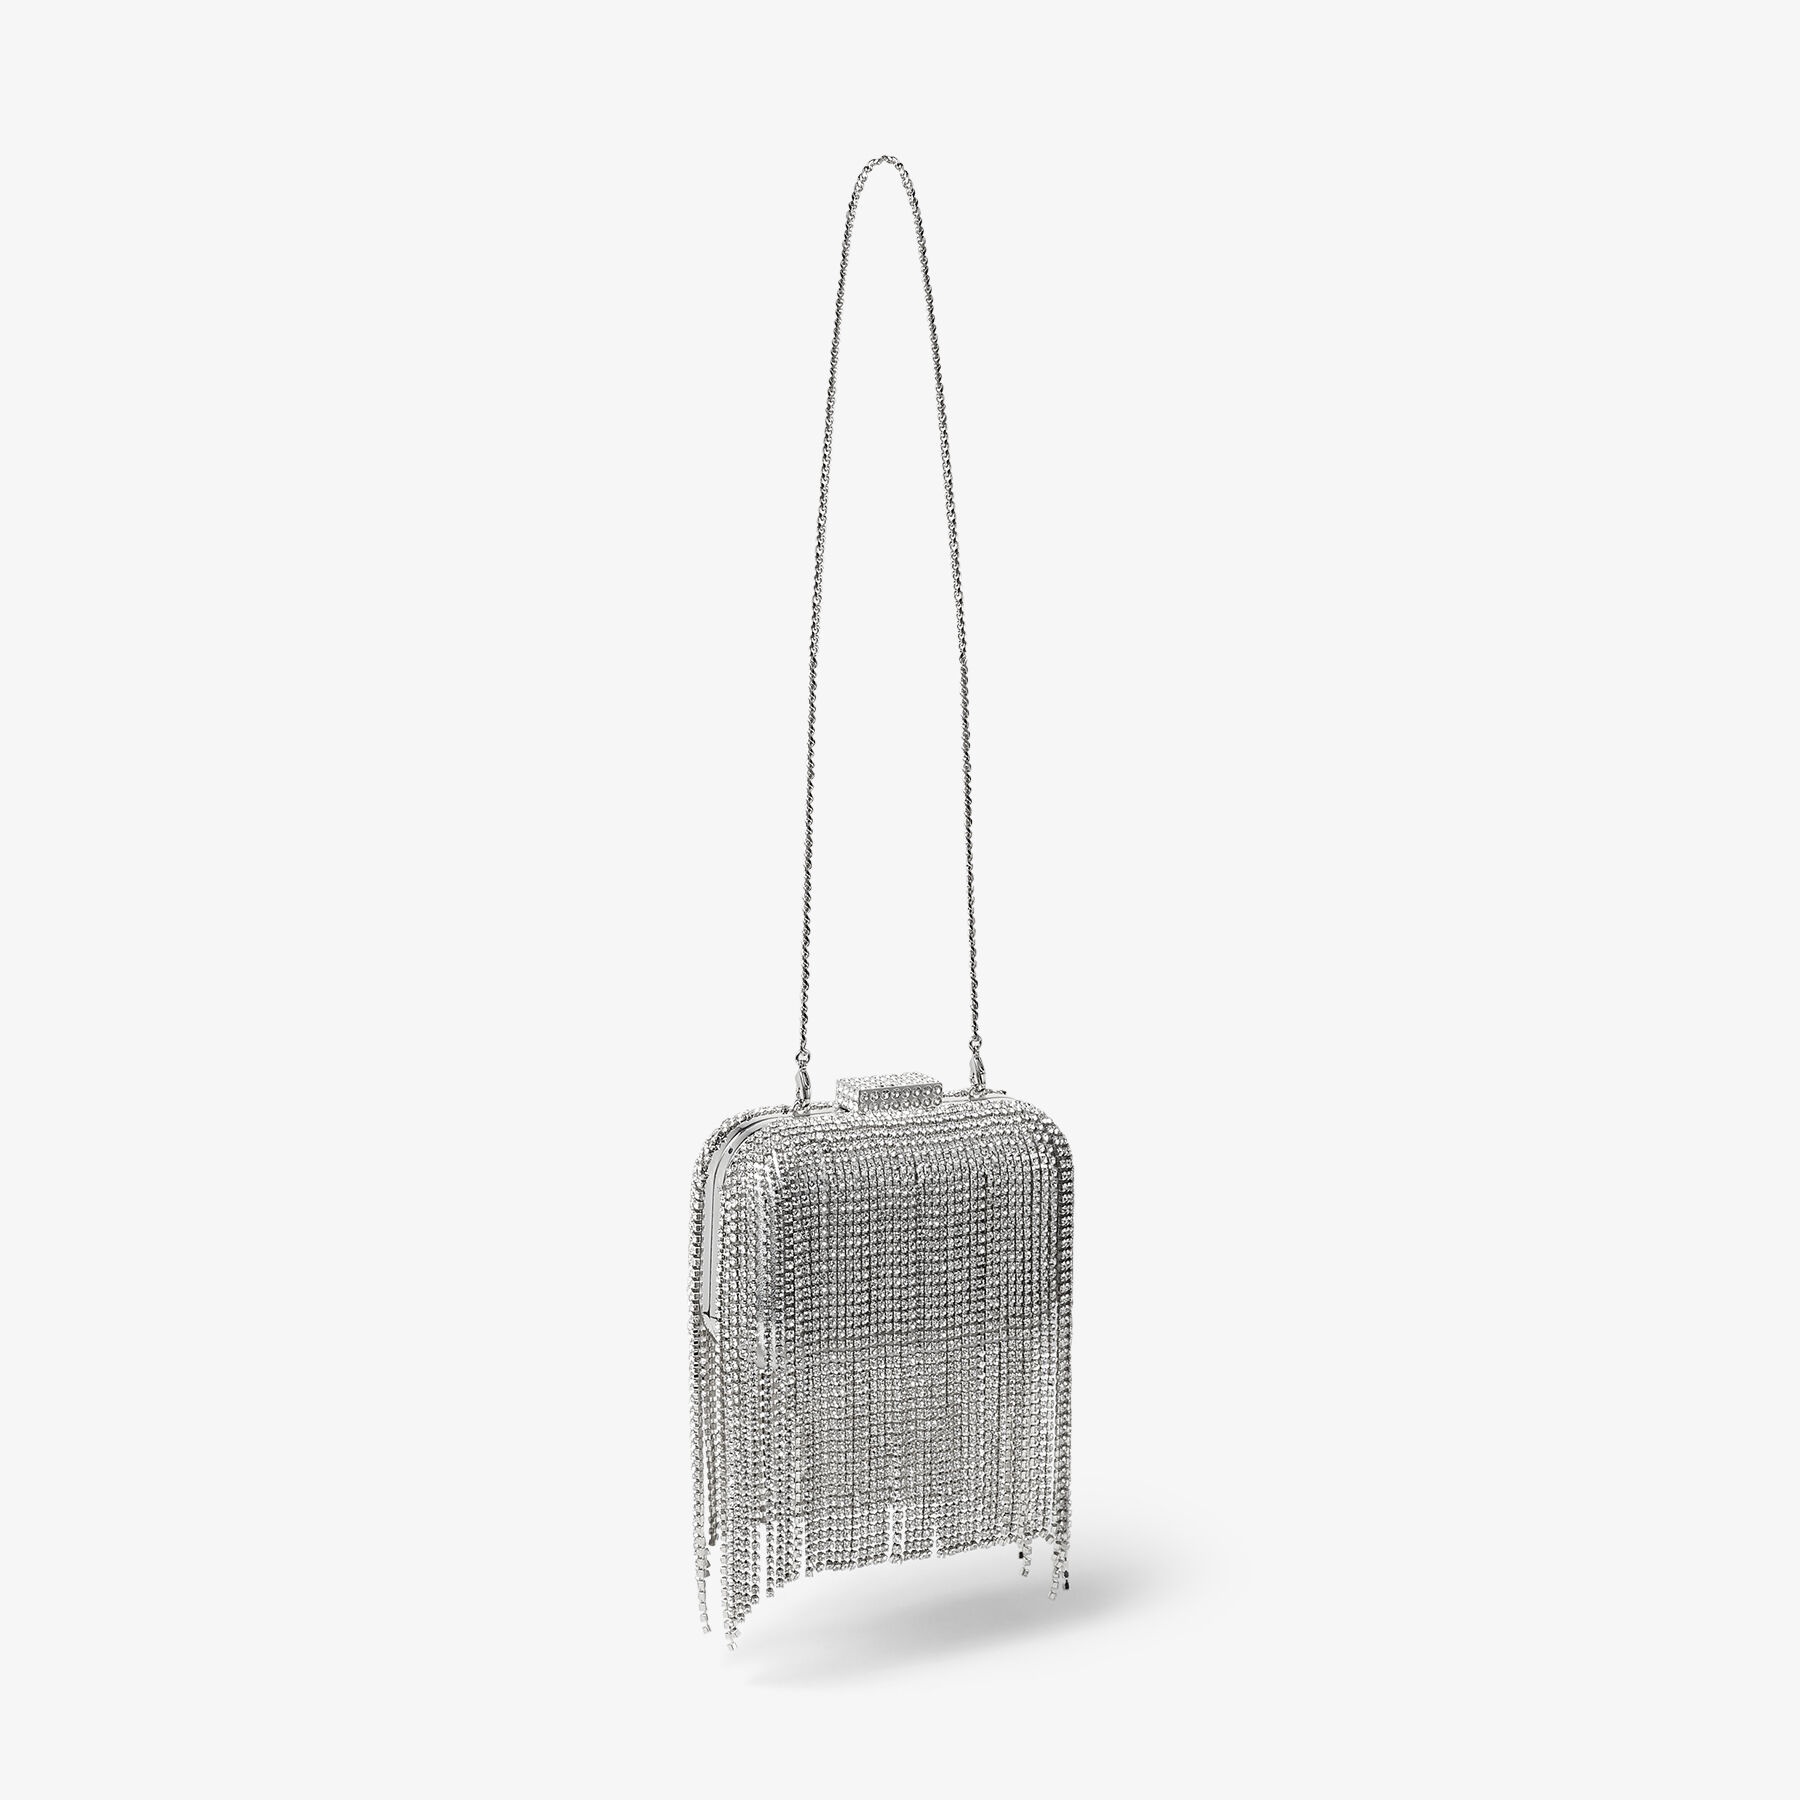 Micro Cloud
Silver Crystal Mini Bag with Fringe - 4